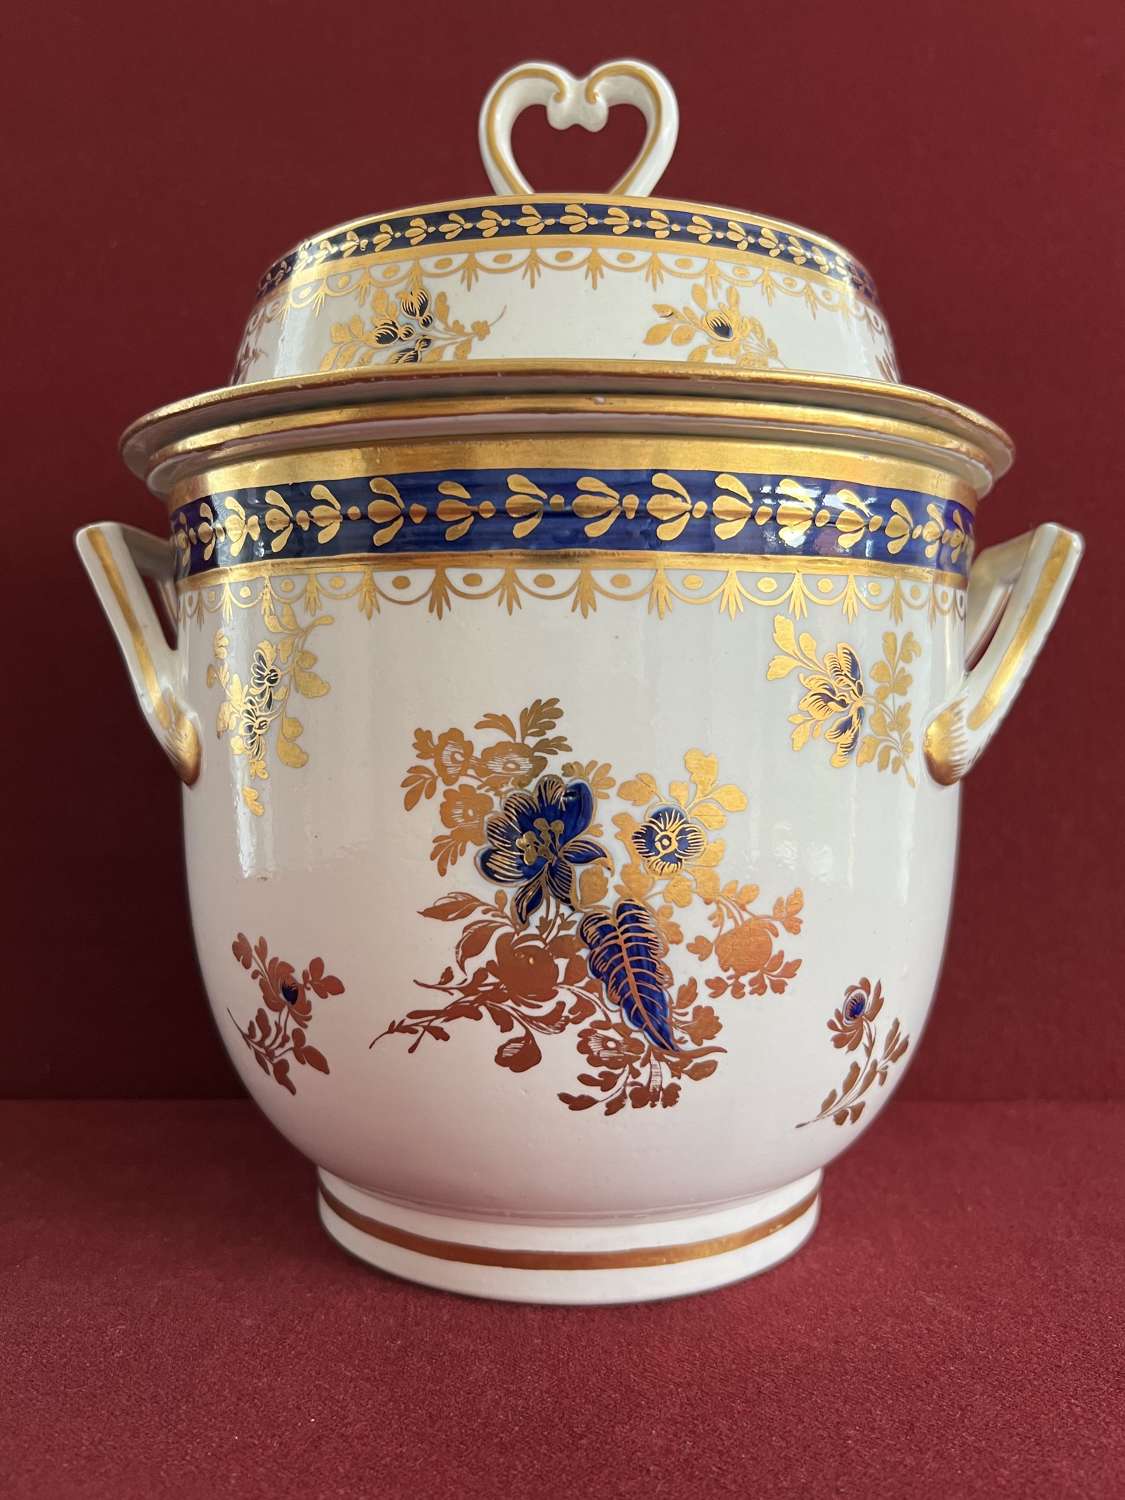 A Caughley Porcelain Ice Pail in 'Dresden Flower' Pattern c.1785-1795